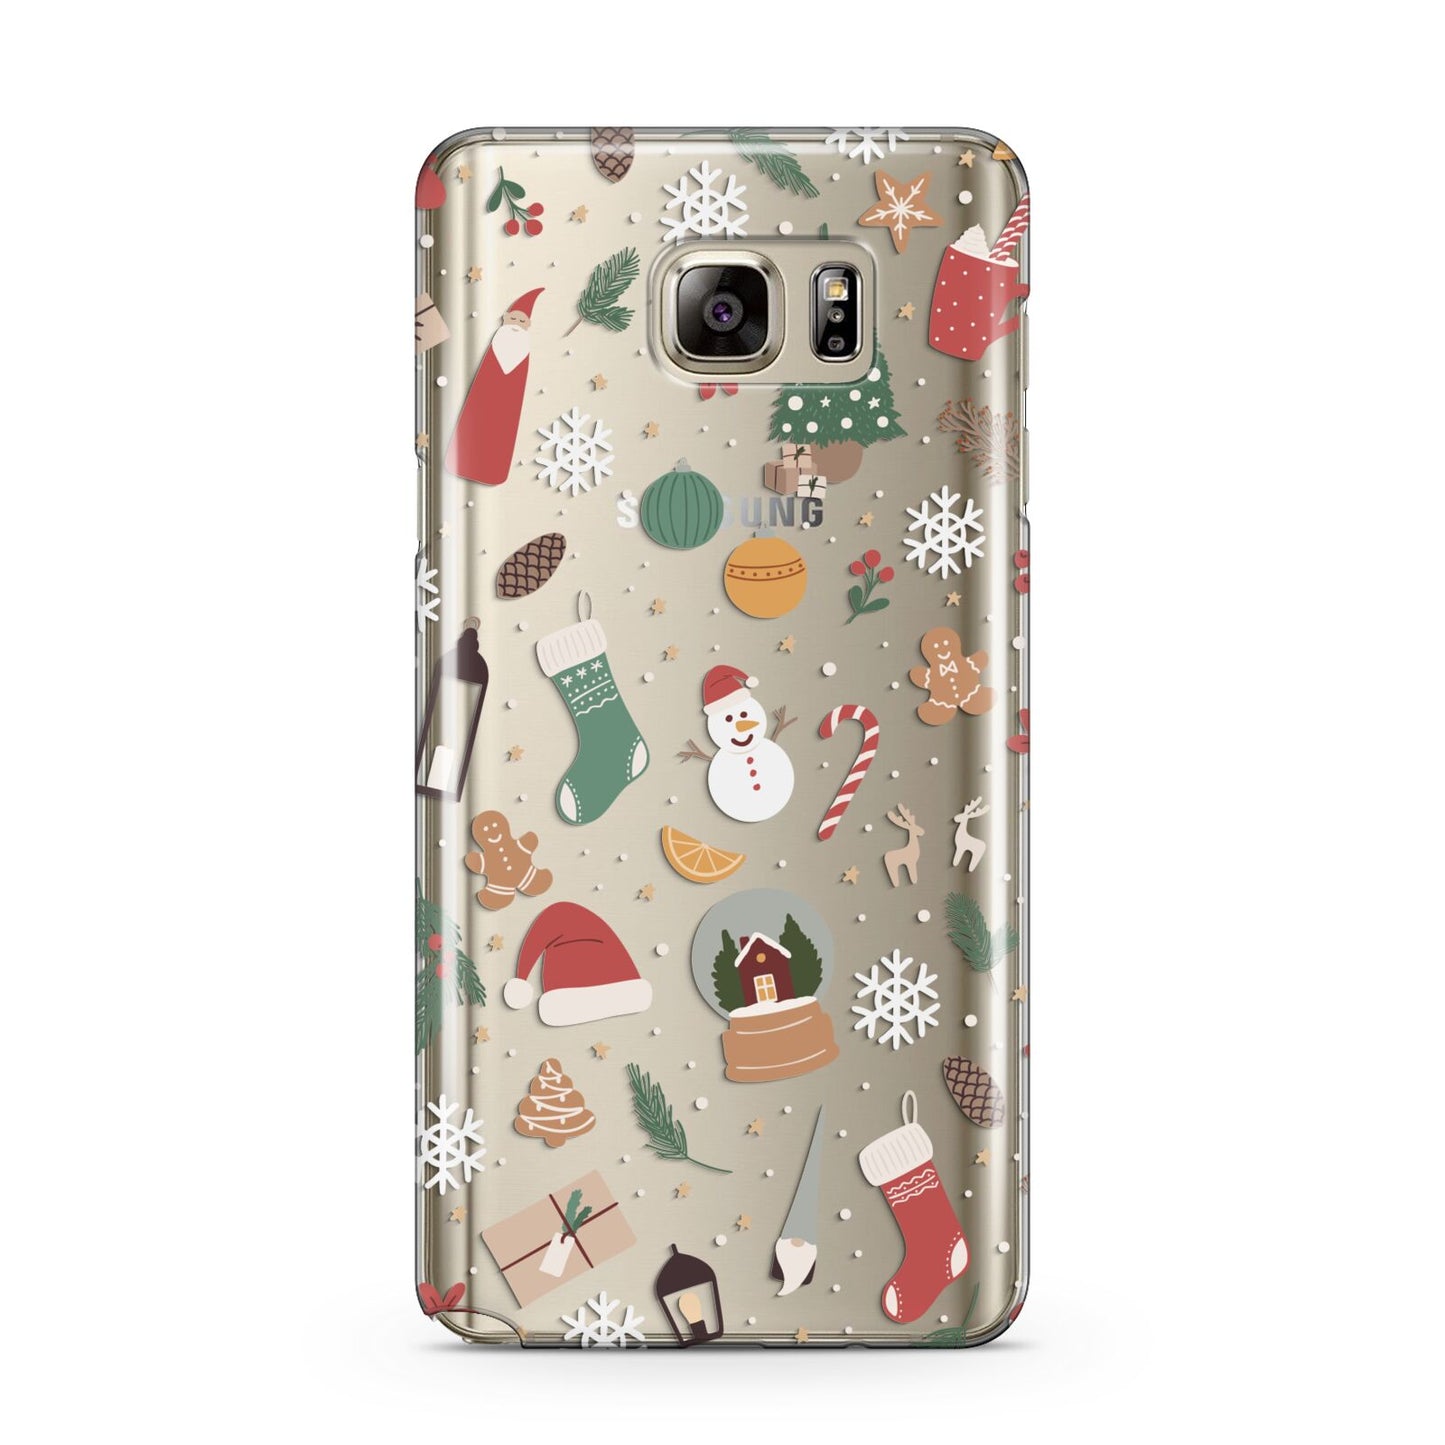 Christmas Assortments Samsung Galaxy Note 5 Case